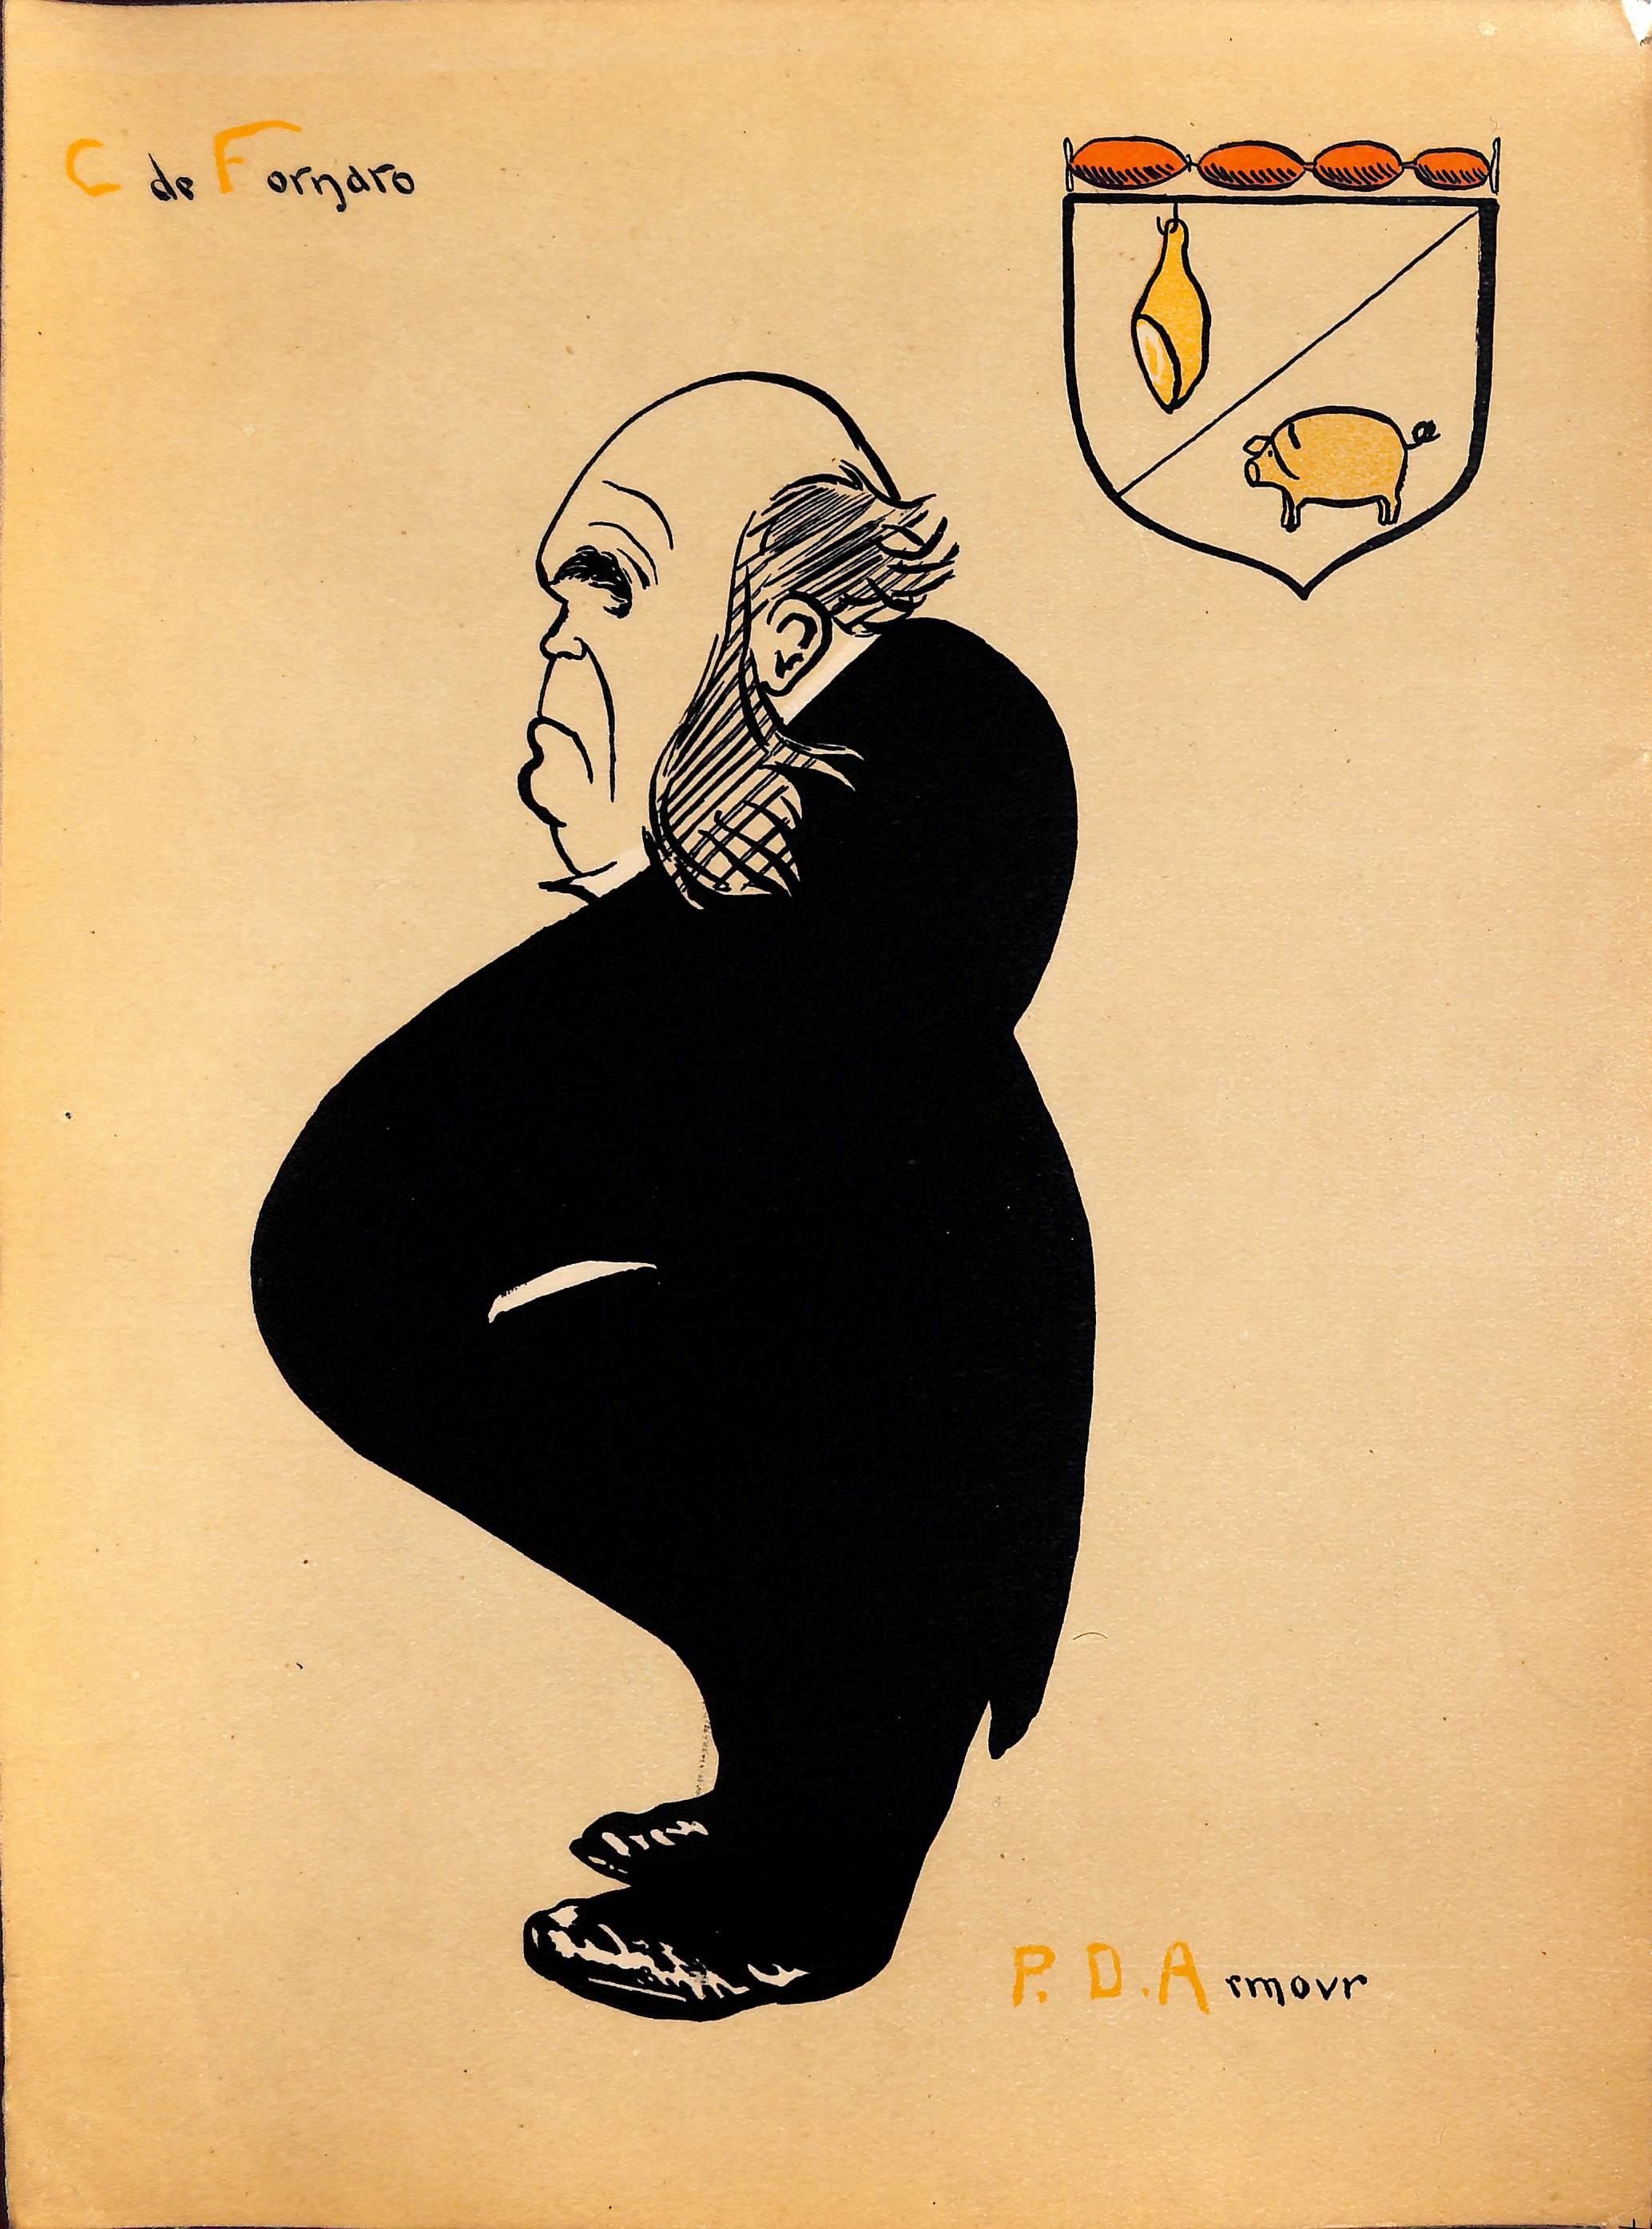 Art Sz: 13 3/4"H x 10 1/4"W

Carlo de Fornaro (sometimes spelled Carlo di Fornaro) (1872–1949) was an artist, caricaturist, writer, humorist, and revolutionary.

His work is in the collection of the US National Gallery of Art and Harvard's Fogg Art